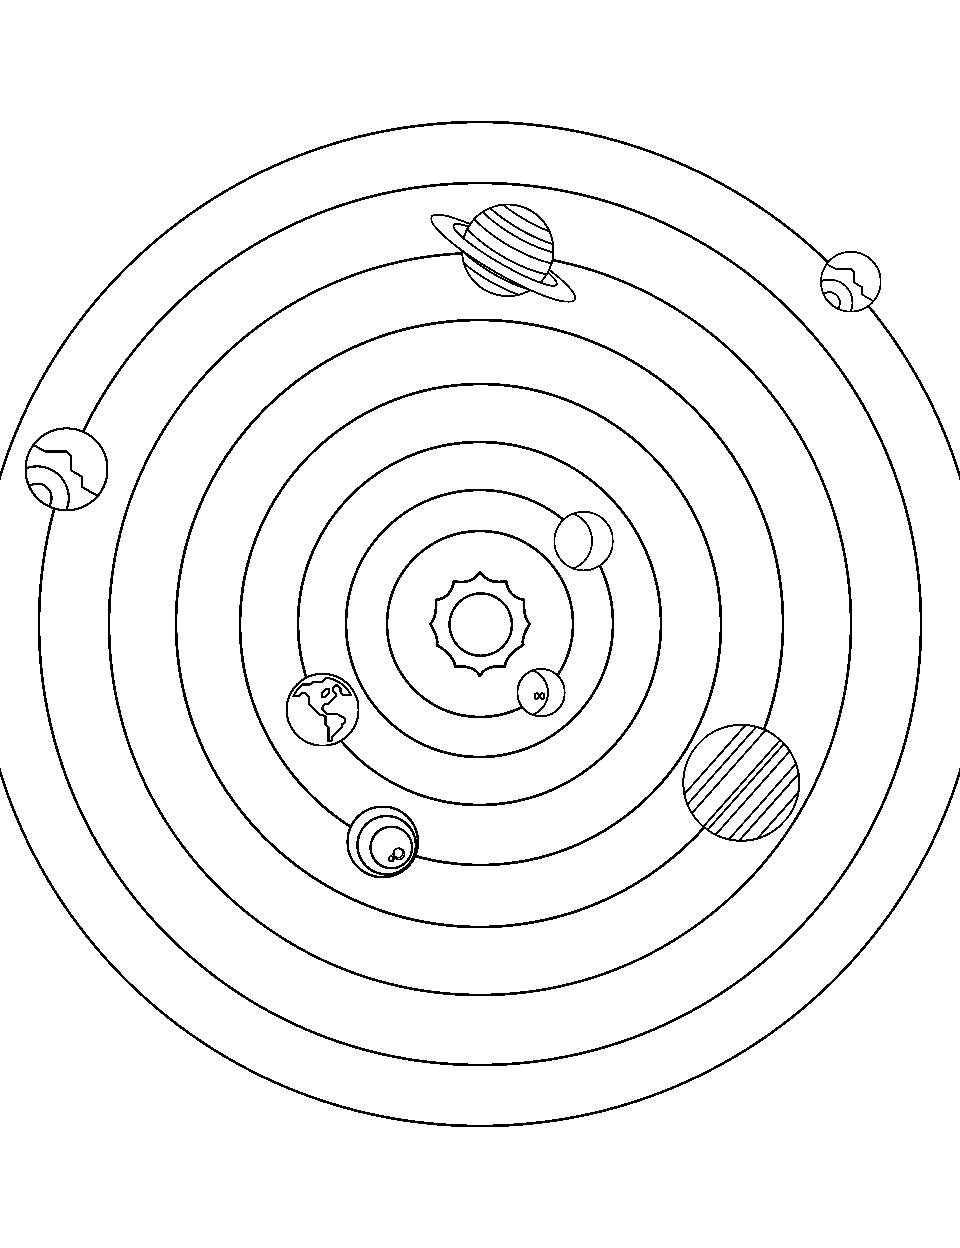 Solar System Spiral Coloring Page - Planets arranged in a spiral formation with the sun at the center.